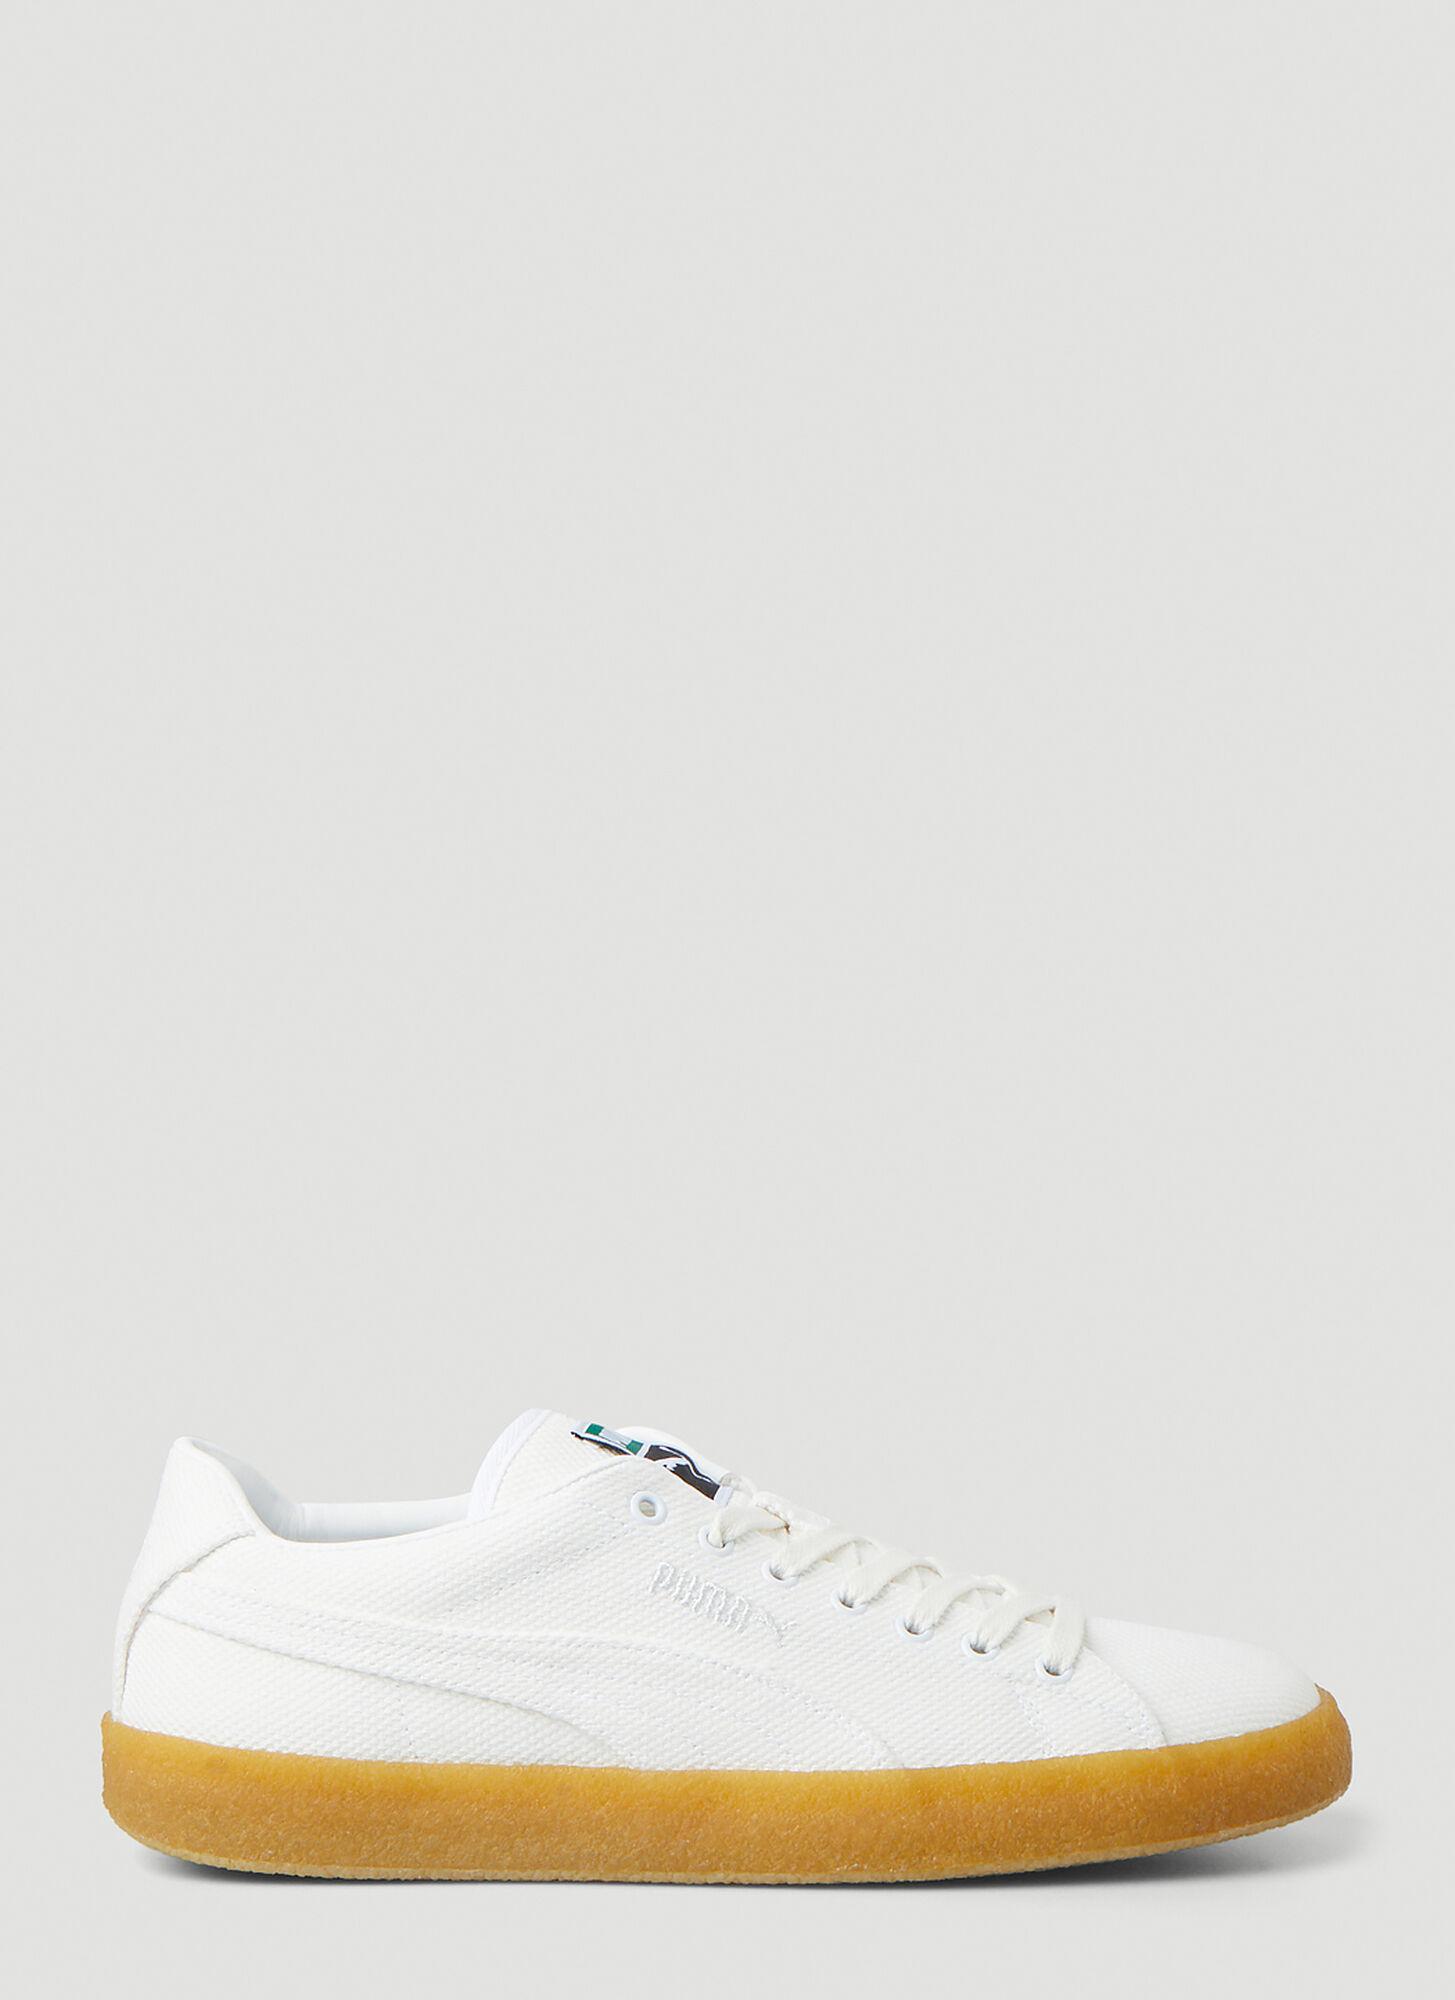 PUMA Crepe Canvas Sneakers in White for Men | Lyst